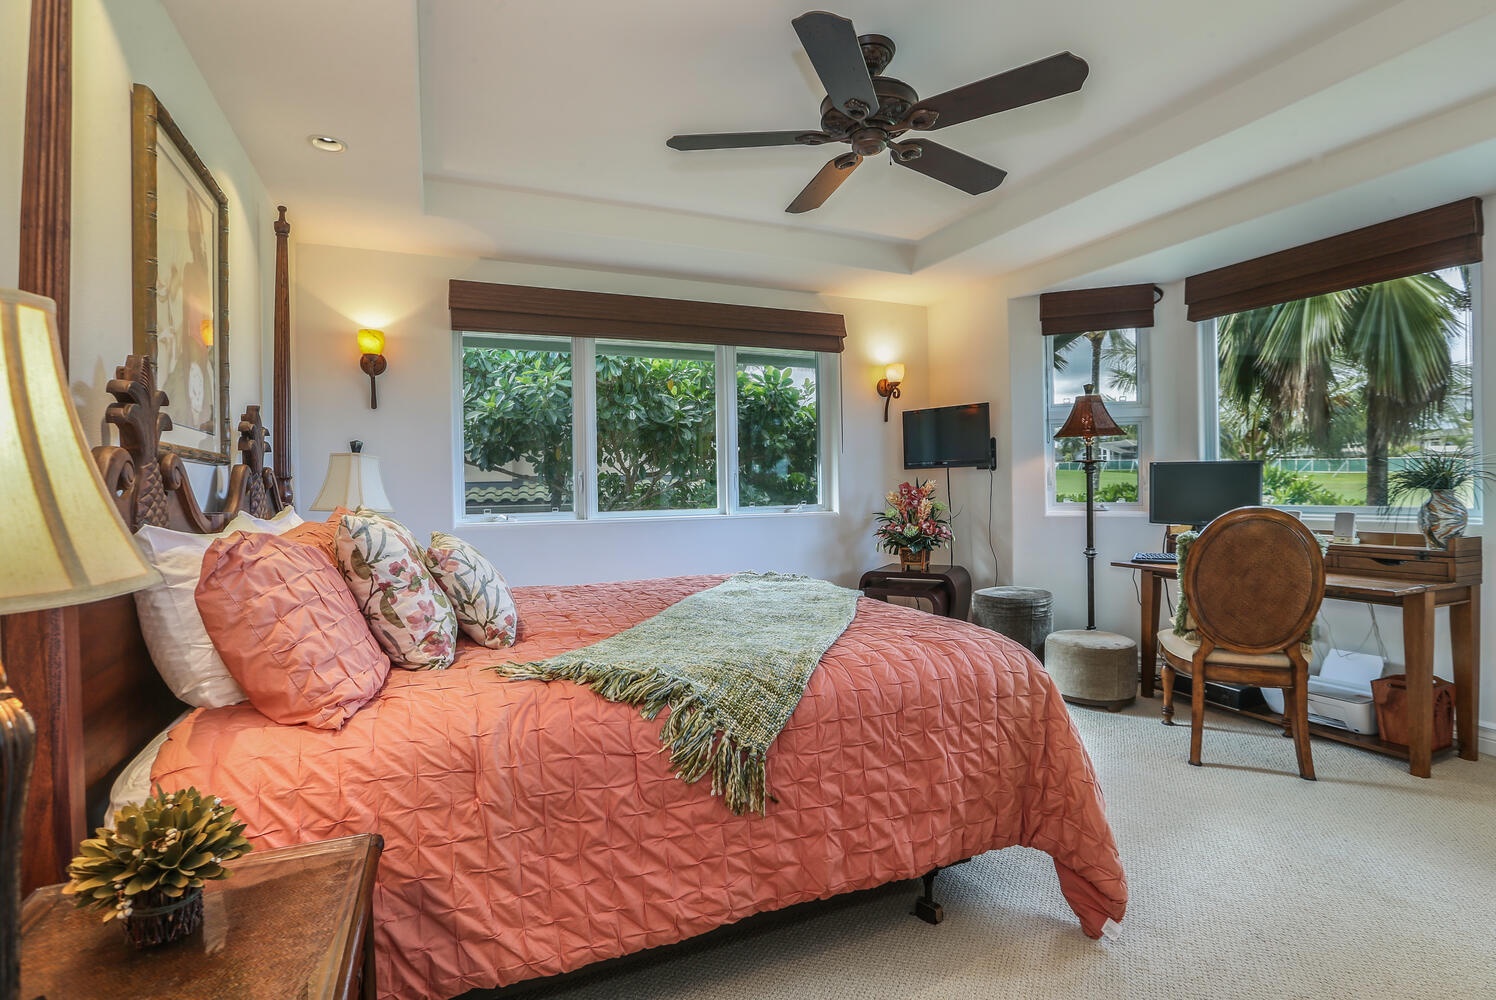 Princeville Vacation Rentals, Hale Moana - Primary Bedroom #1 with California King bed, large walk-in closet, private en suite with large jacuzzi tub